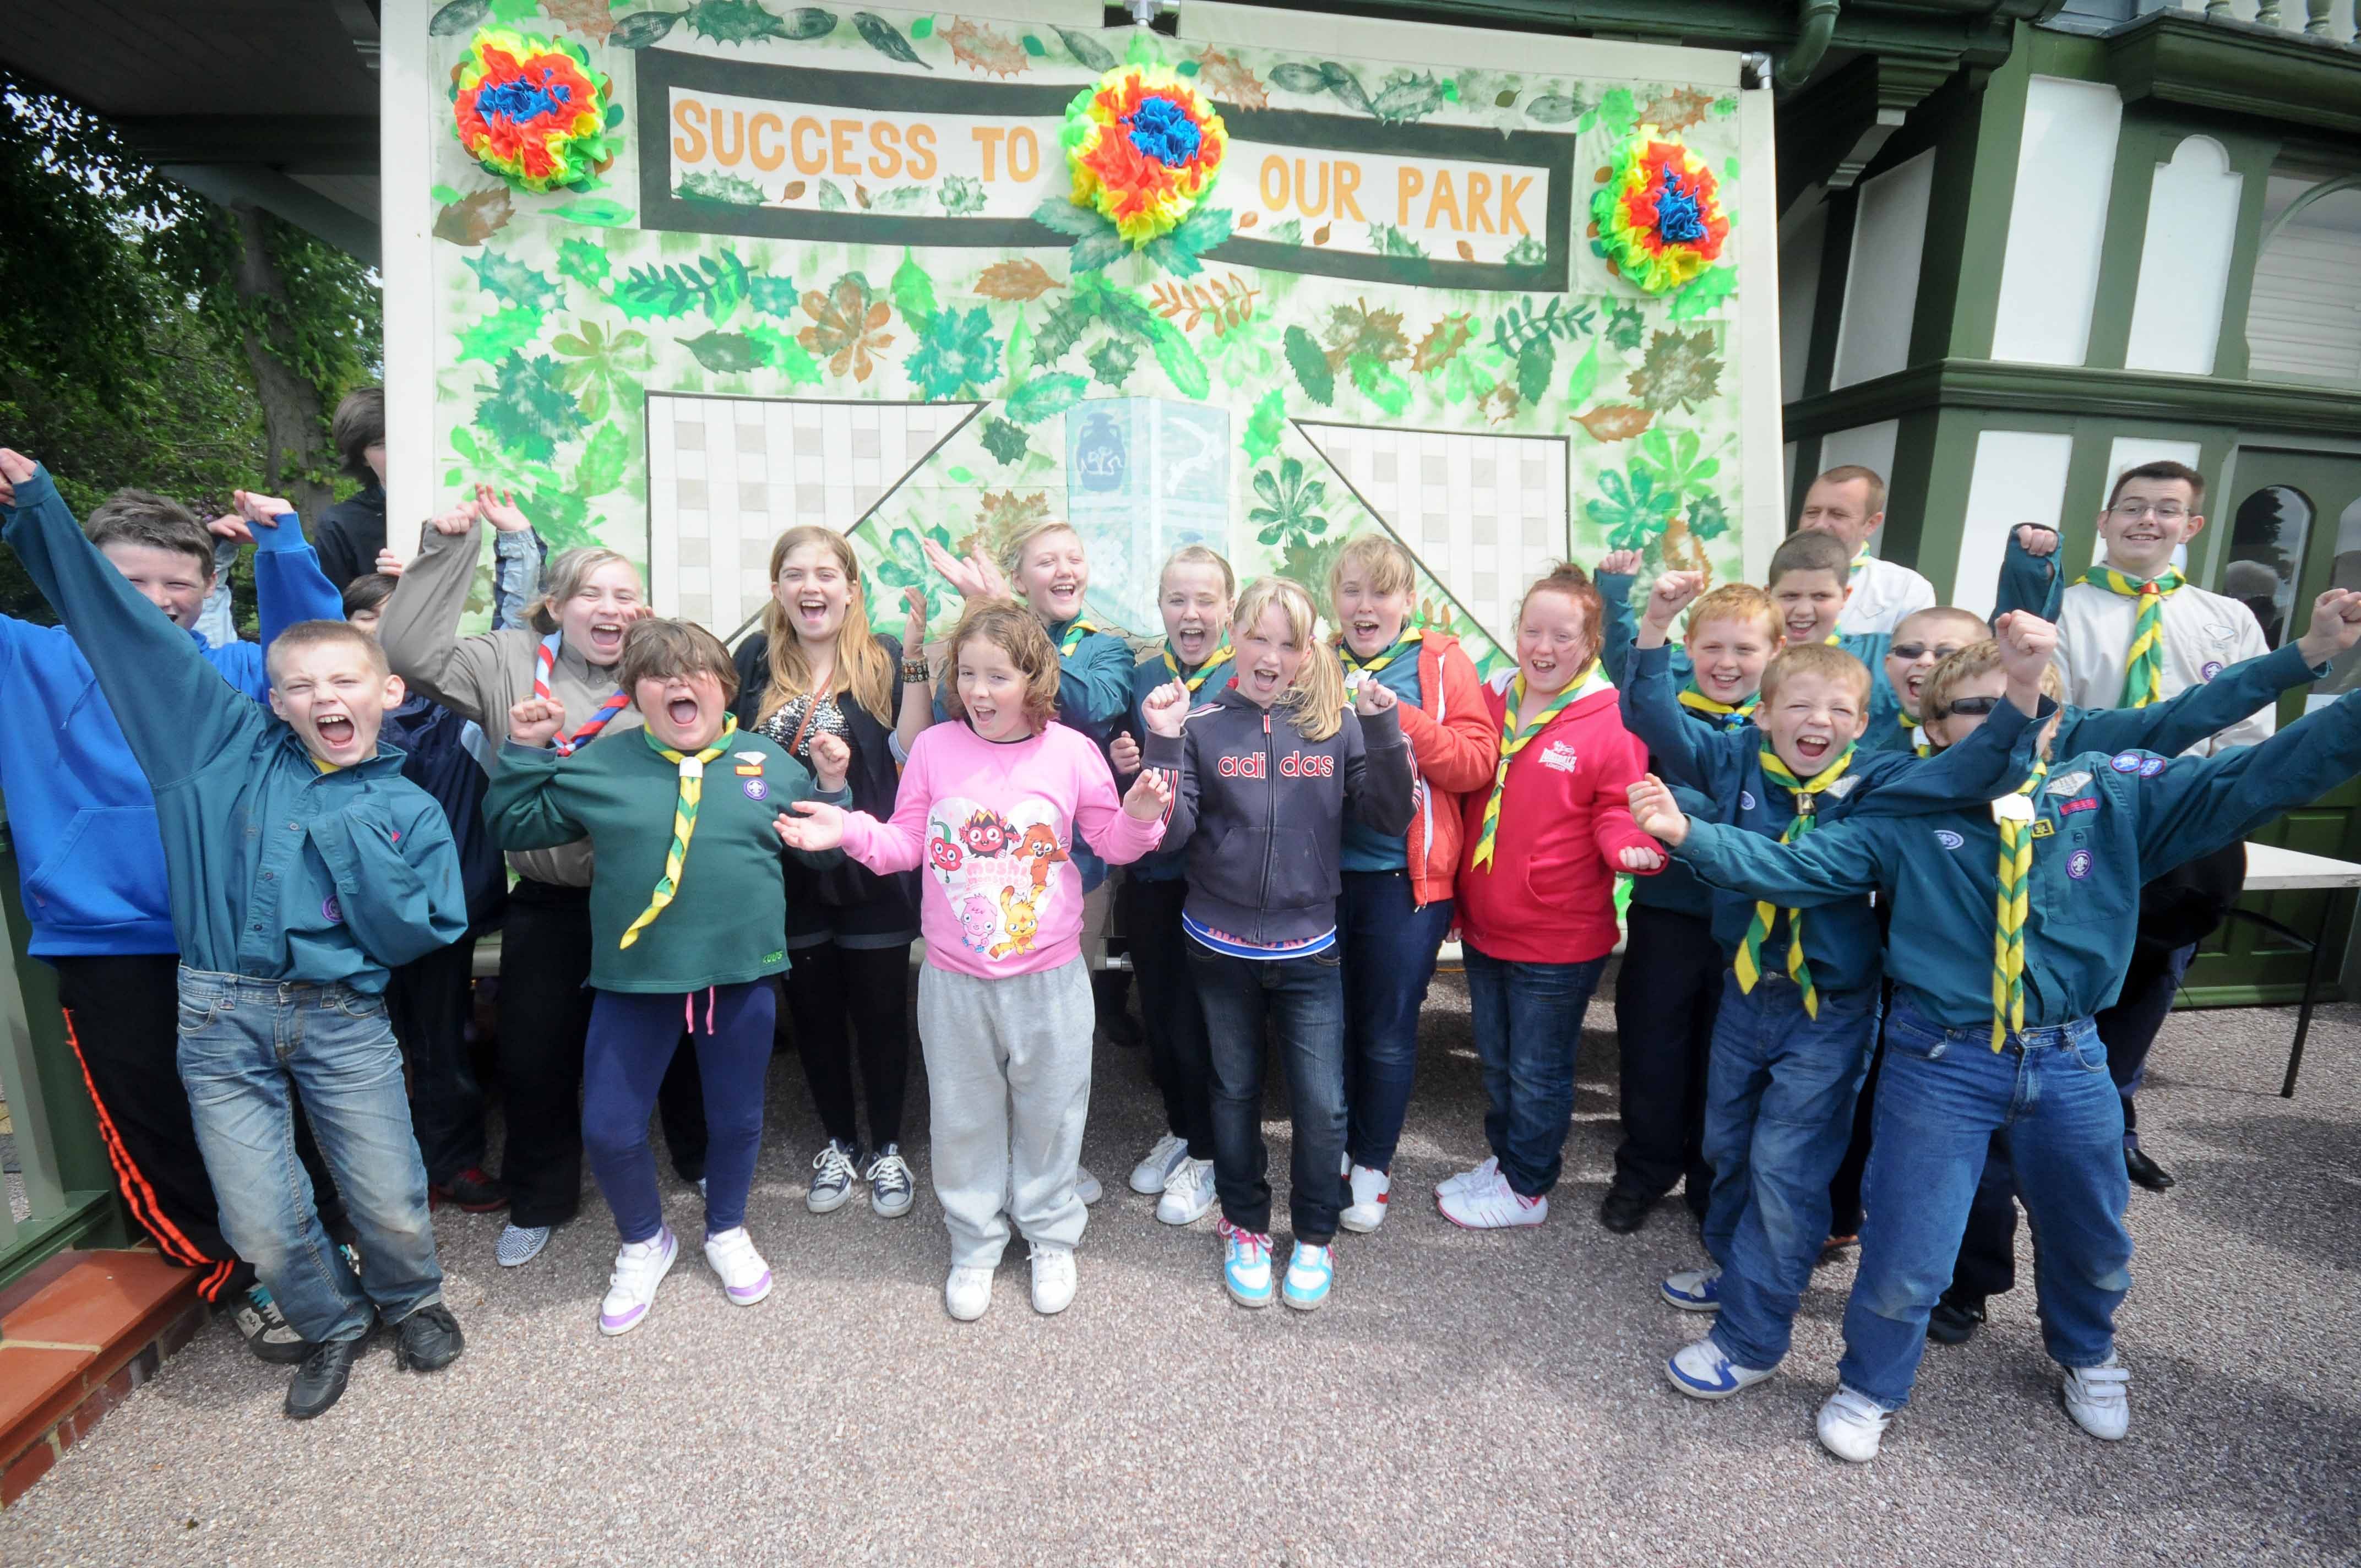 A group of young scouts celebrate in front of a poster which reads 'success to our park'